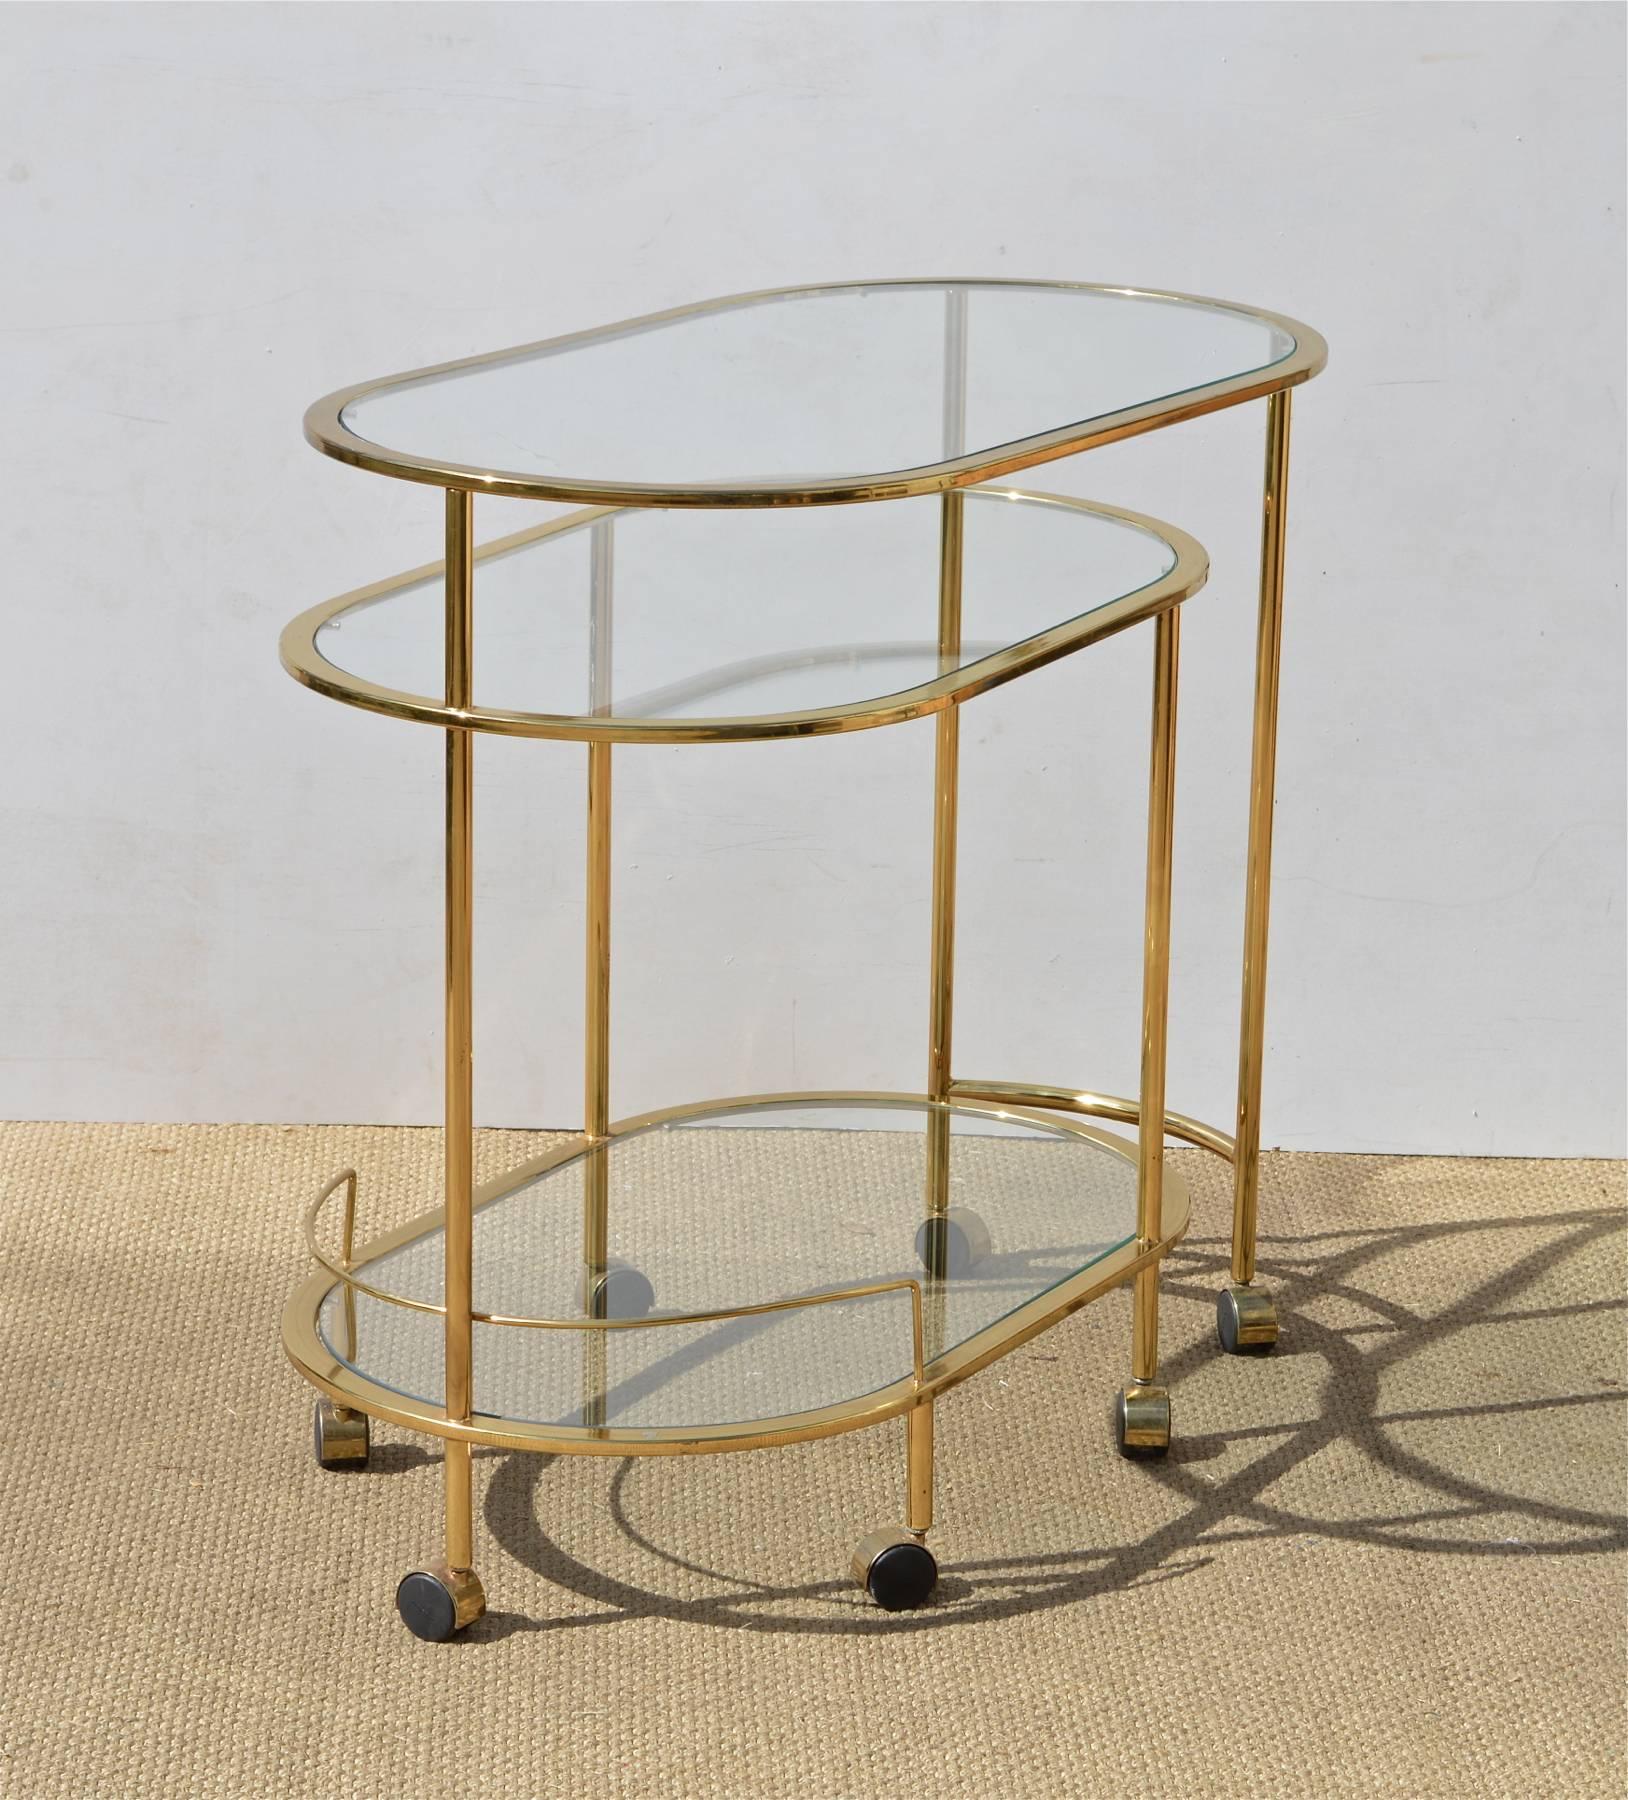 20th Century Brass and Glass Bar Cart in the Manner of Springer